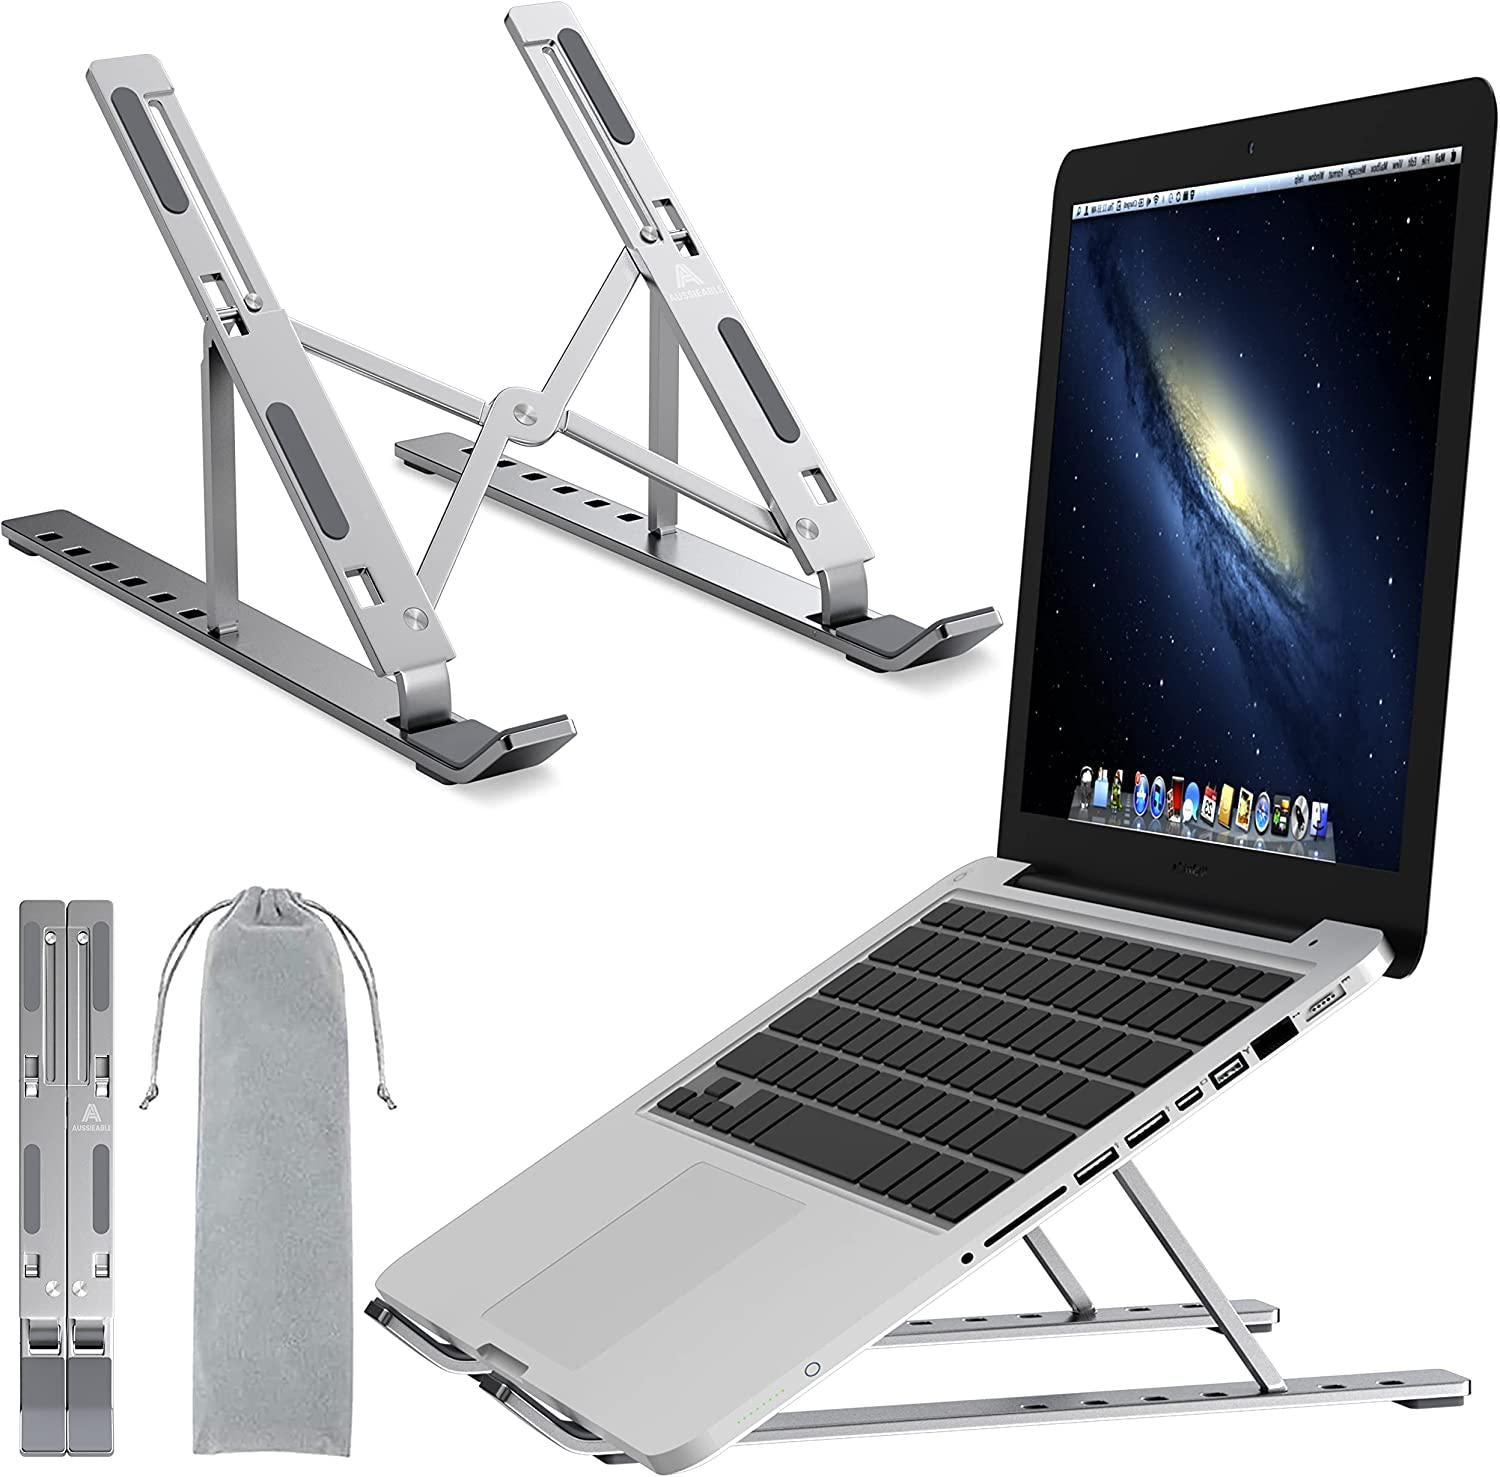 Aussieable, Laptop Stand for Desk, Aussieable Adjustable Ergonomic Portable Aluminum Laptop Holder, Foldable Computer Stand, 7 Angles, Anti-Slip, Laptop Riser, Compatible with Laptops and Tablets, Silver